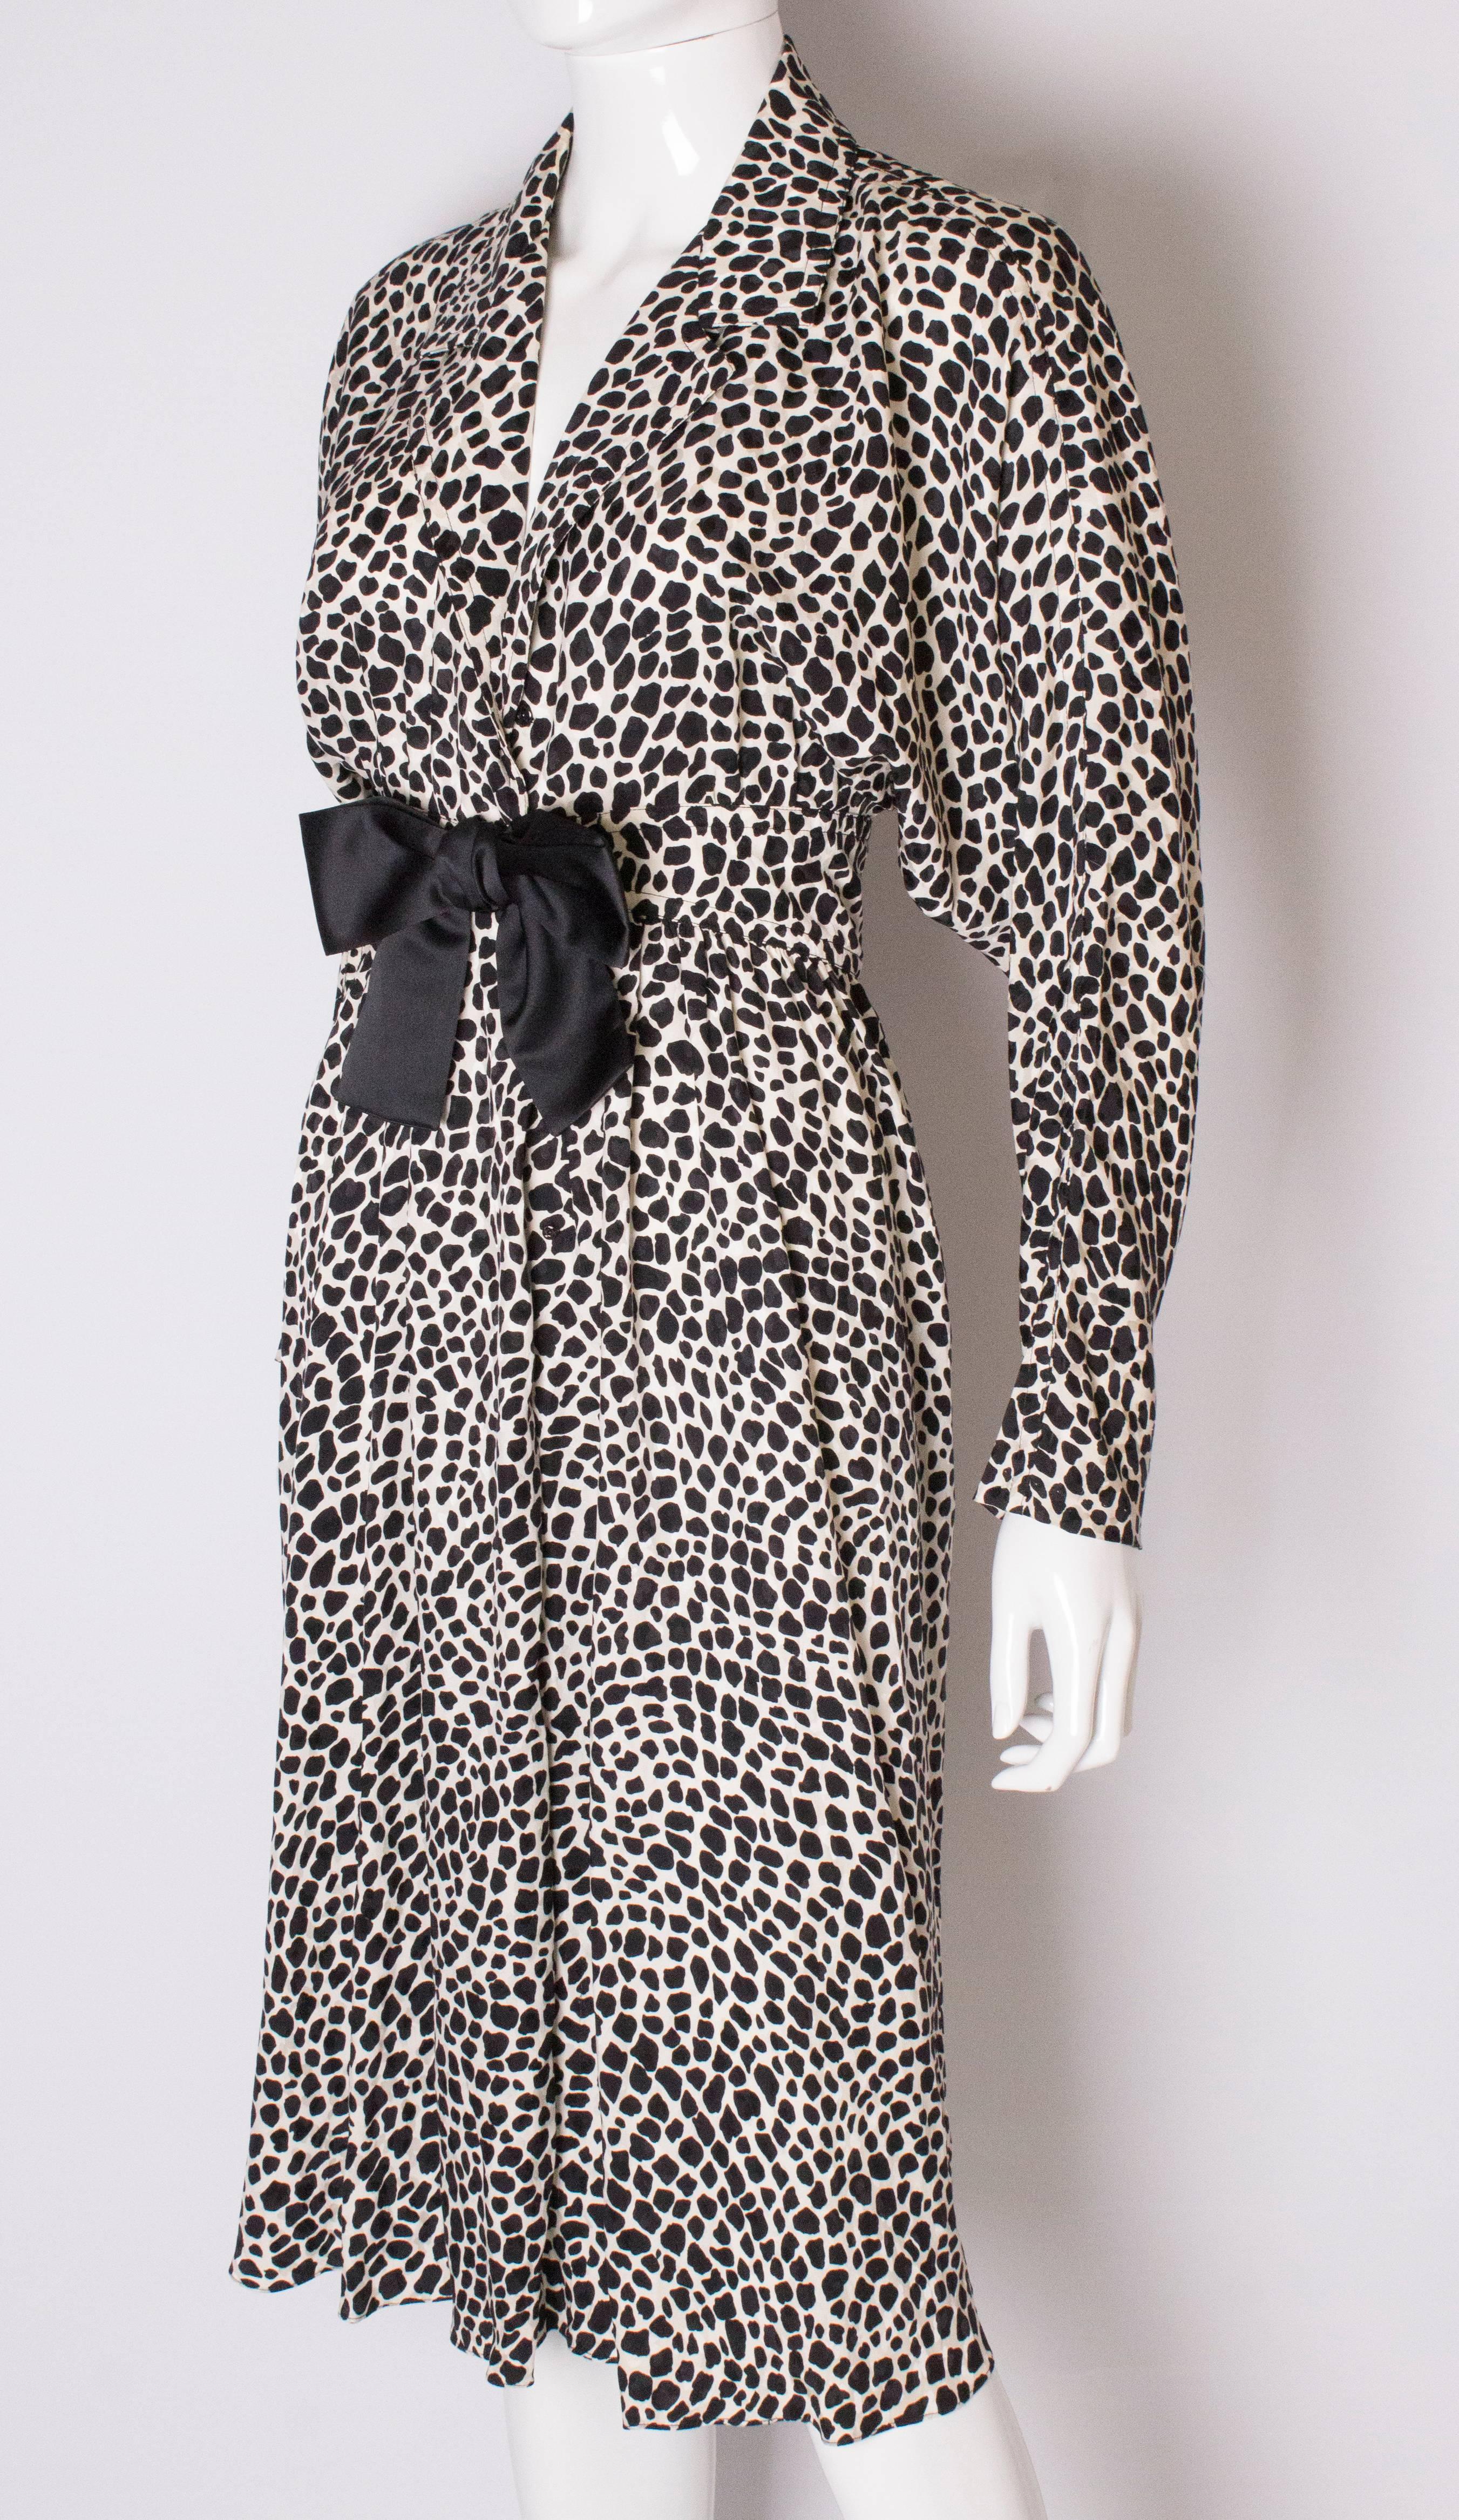 Women's or Men's A Vintage 1980s Black and White printed Dress with bow detail by Adele Simpson